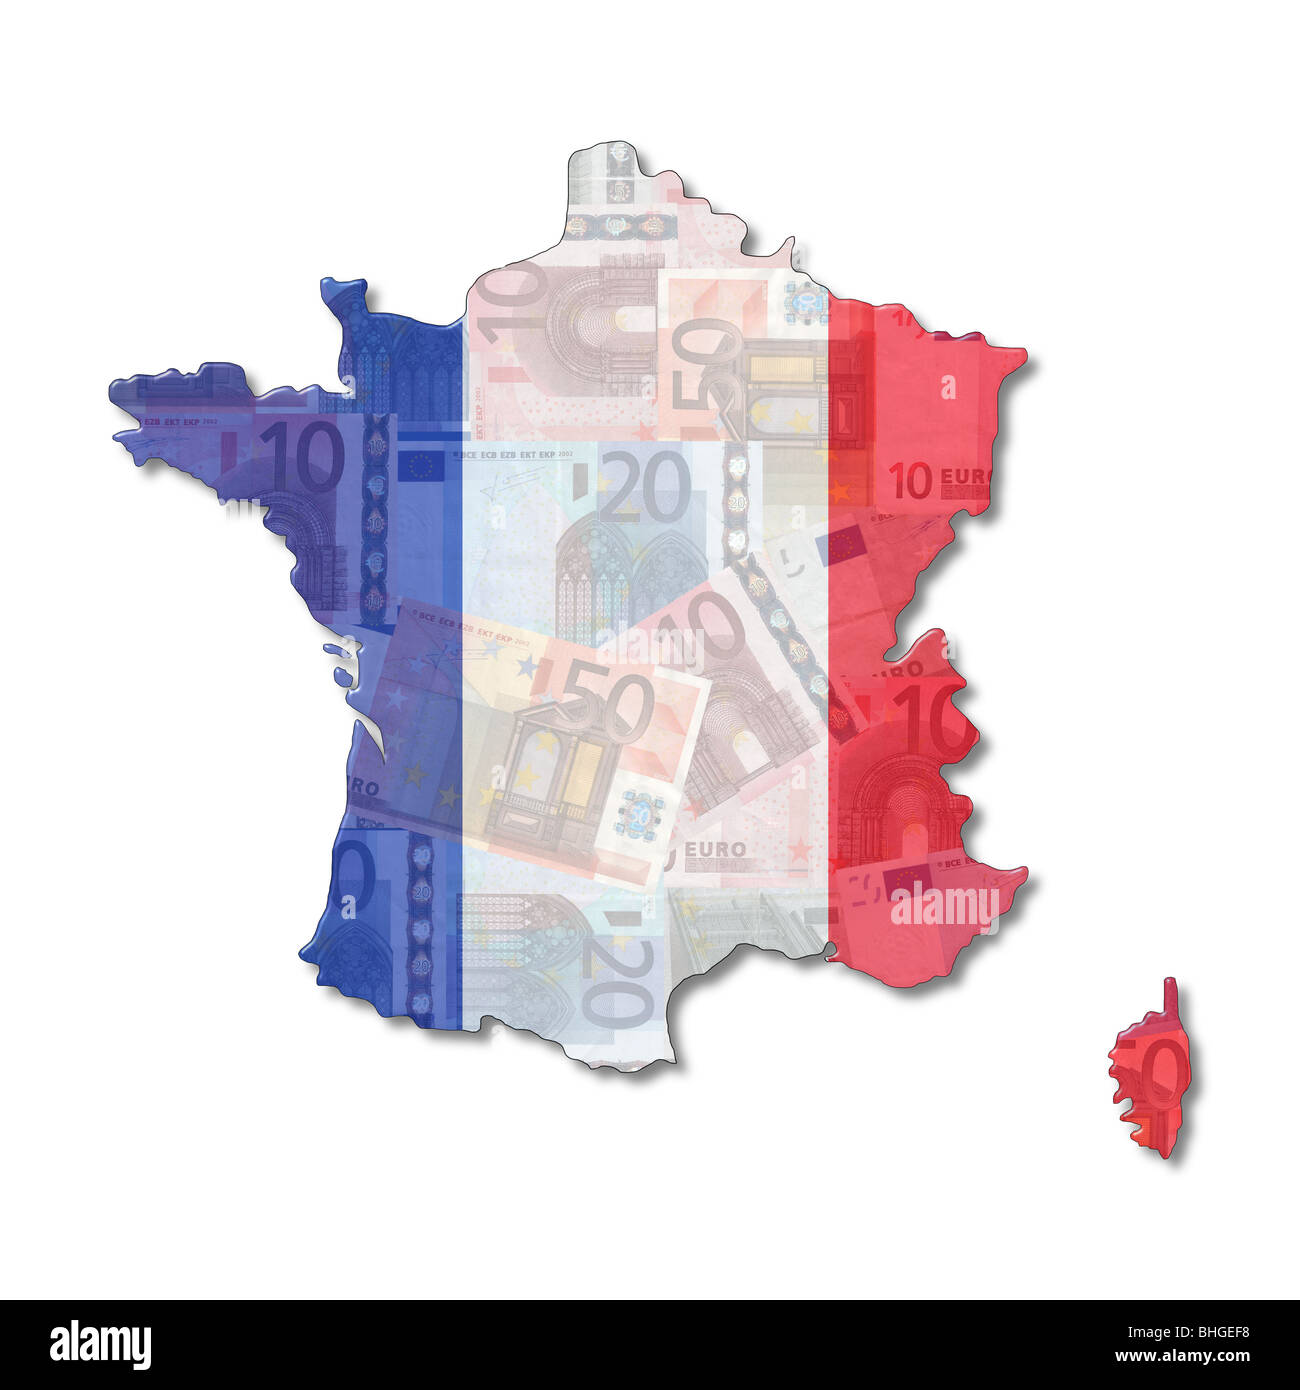 France Map flag with euro notes illustration Stock Photo